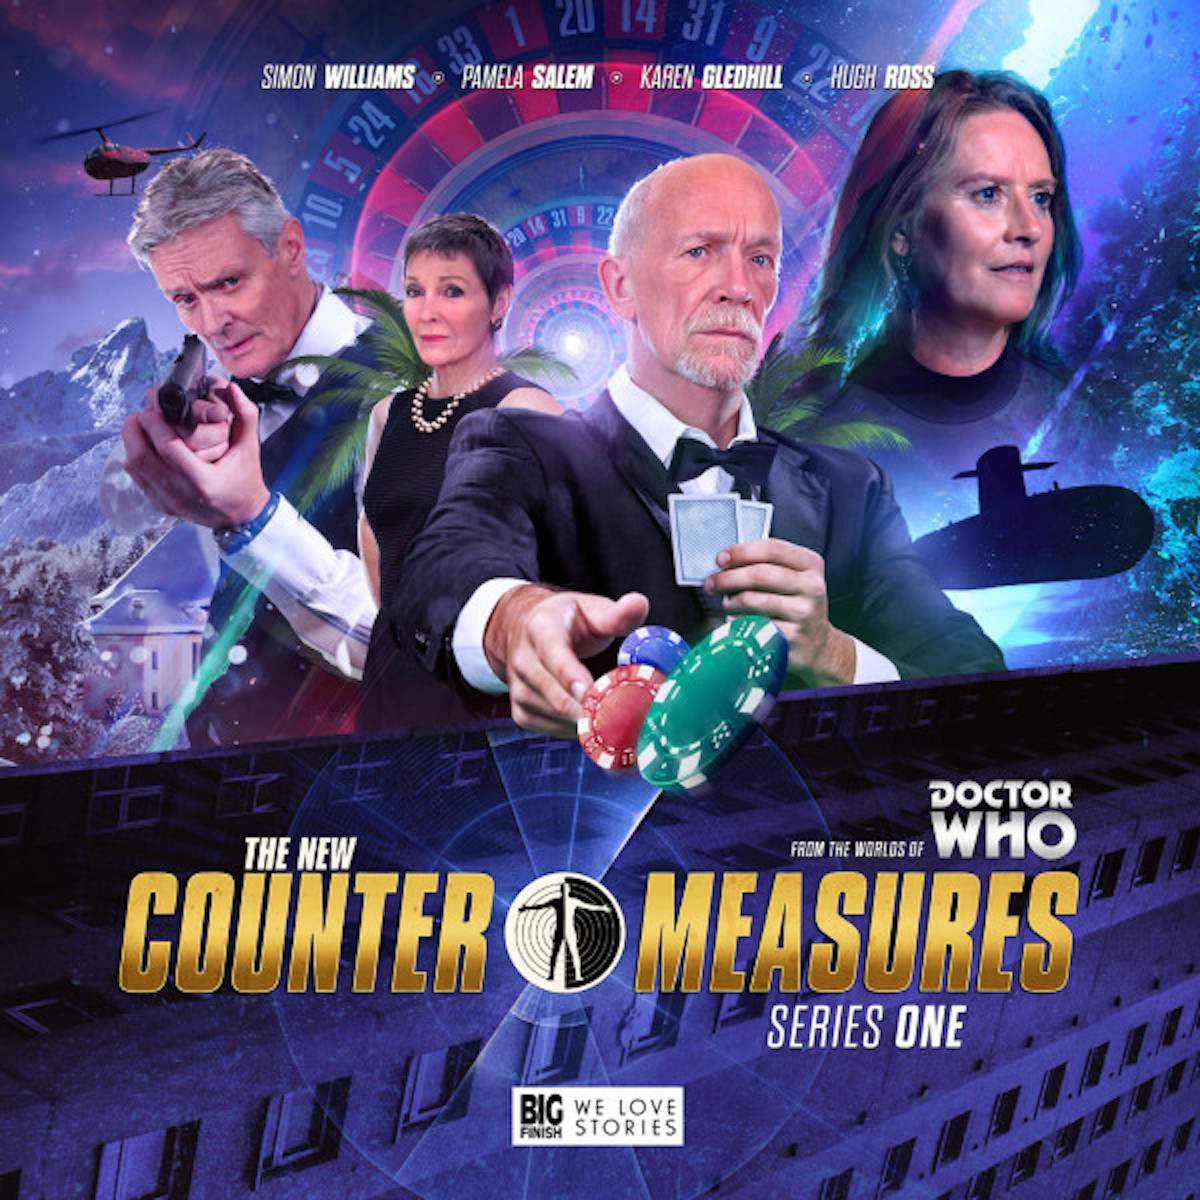 The New Counter Measures Series 1